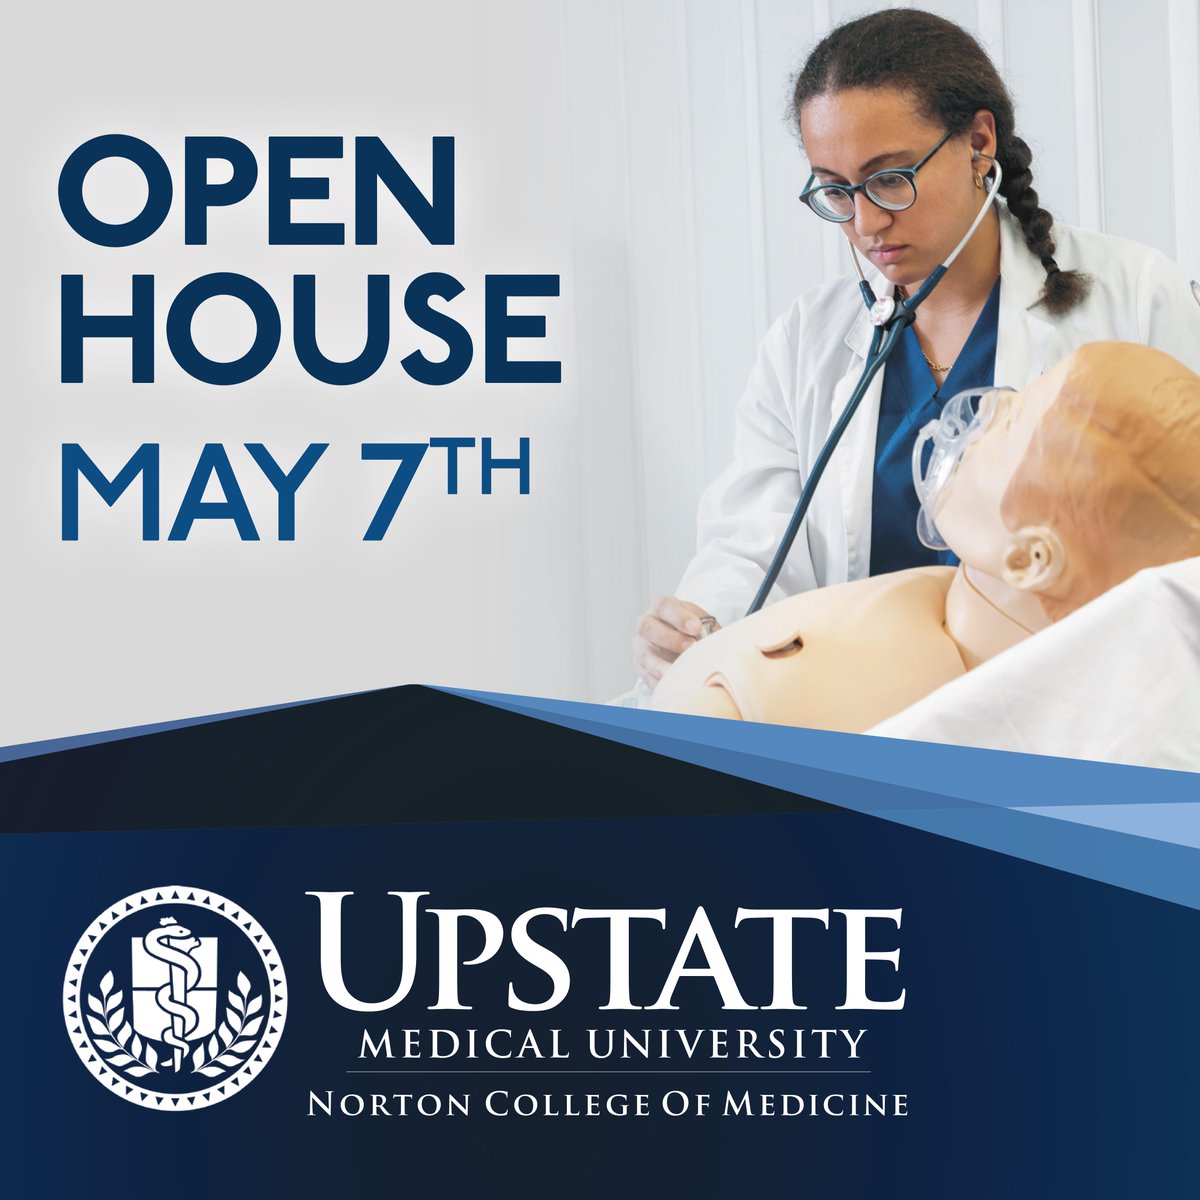 Upstate invites prospective students to our Spring Open House for the Norton College of Medicine! • Meet with faculty and learn about our medical programs • Learn about financial aid • Tour campus • Hear from current medical students Register here ▸ bit.ly/3vYDSiq